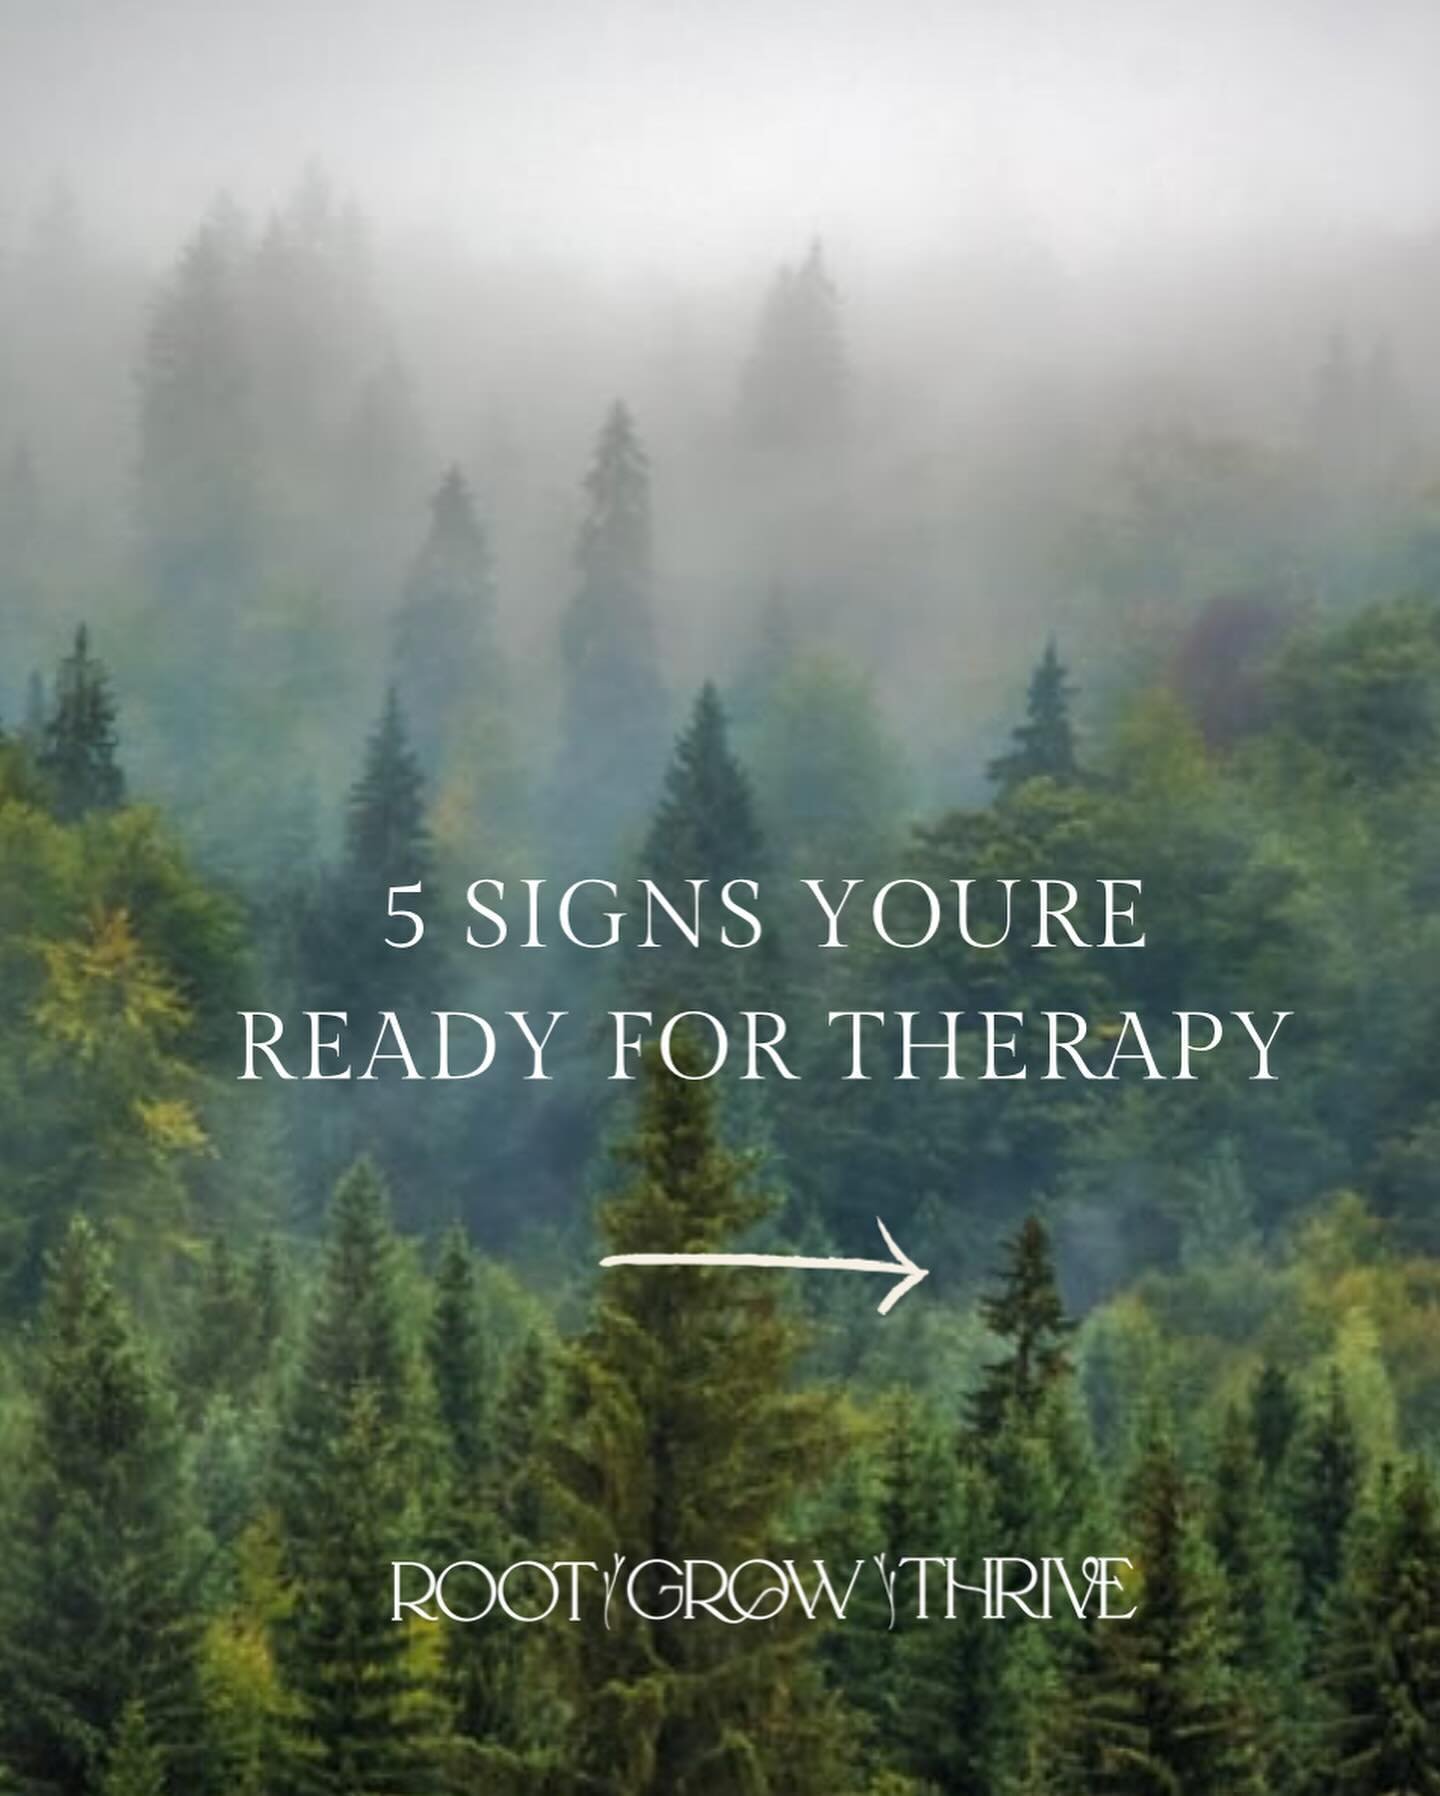 Yes there are lots of reasons we seek therapy, but being ready can take a long time. If you&rsquo;re struggling, reaching out can feel like A Lot. 

And finances or location or finding a therapist that &ldquo;gets&rdquo; you are less of an issue than